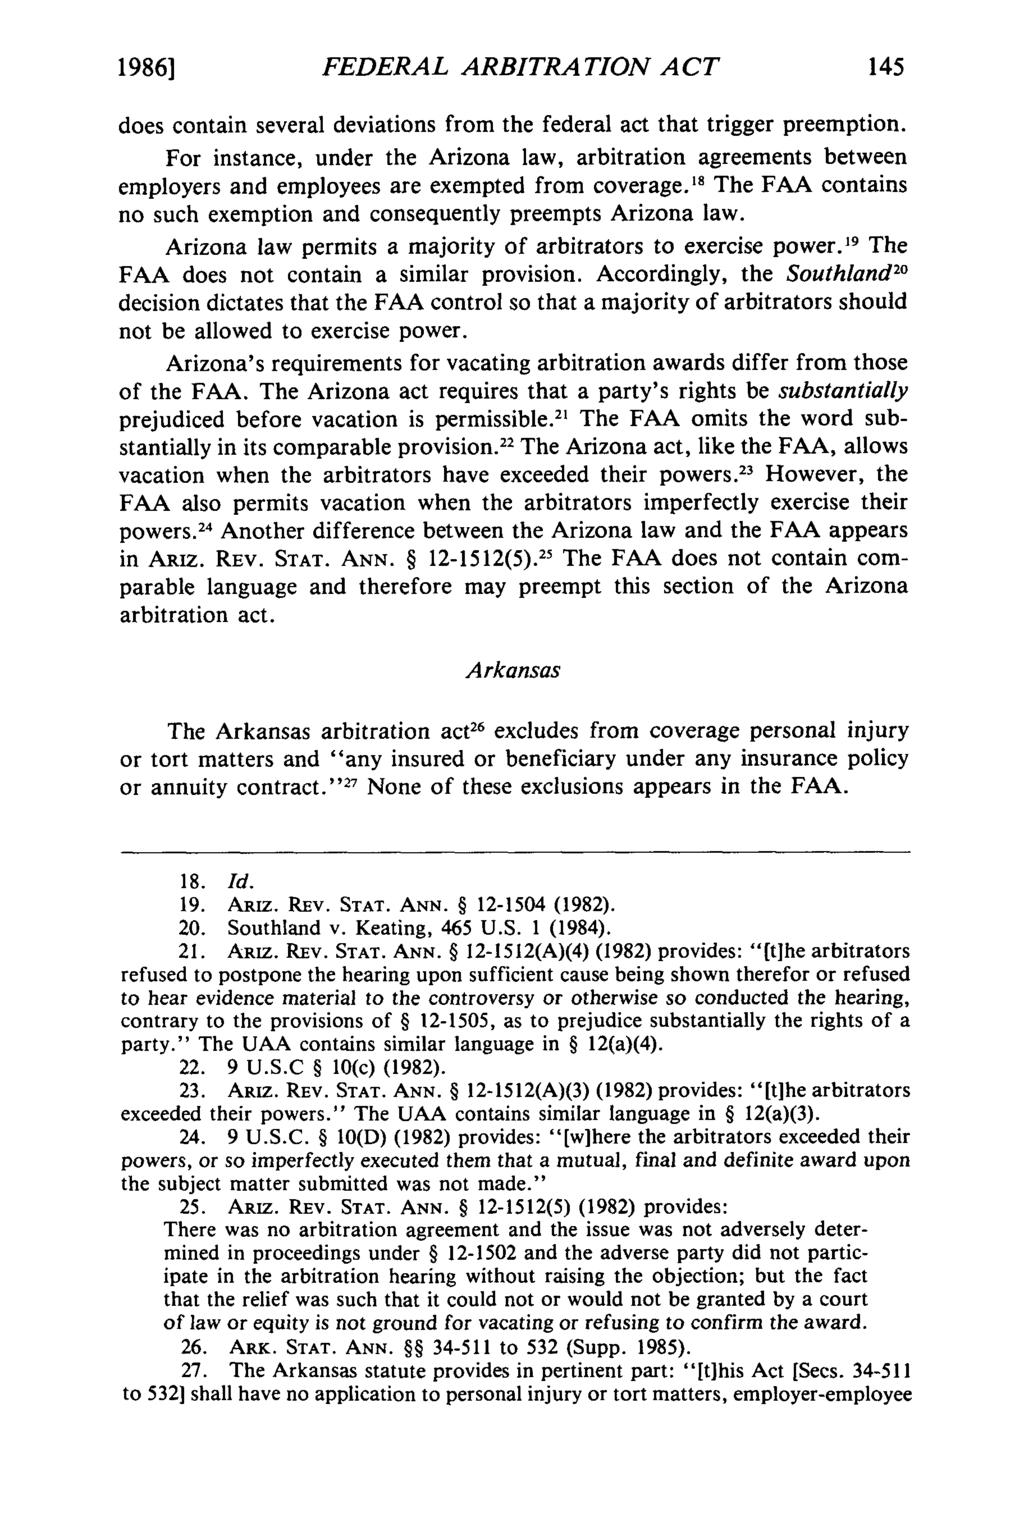 1986] FEDERAL et al.: Federal Arbitration ARBITRATION Act Comparison A CT does contain several deviations from the federal act that trigger preemption.